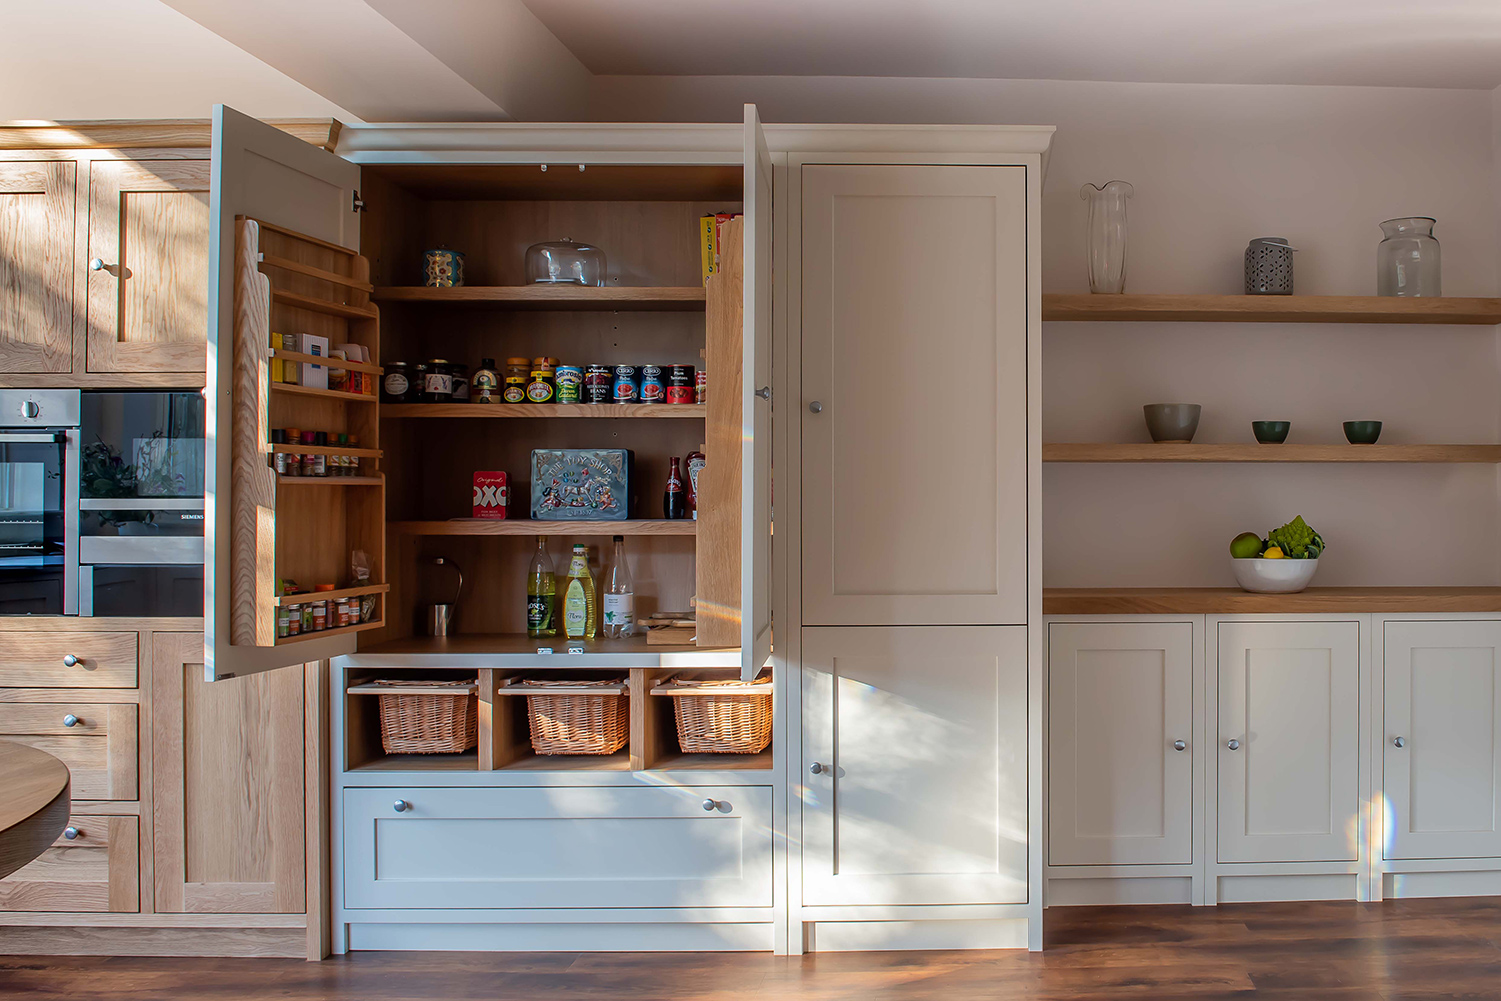 The Oak Timbers Kitchen by Shere Kitchens - beautiful kitchens handmade in Shere Guildford Surrey